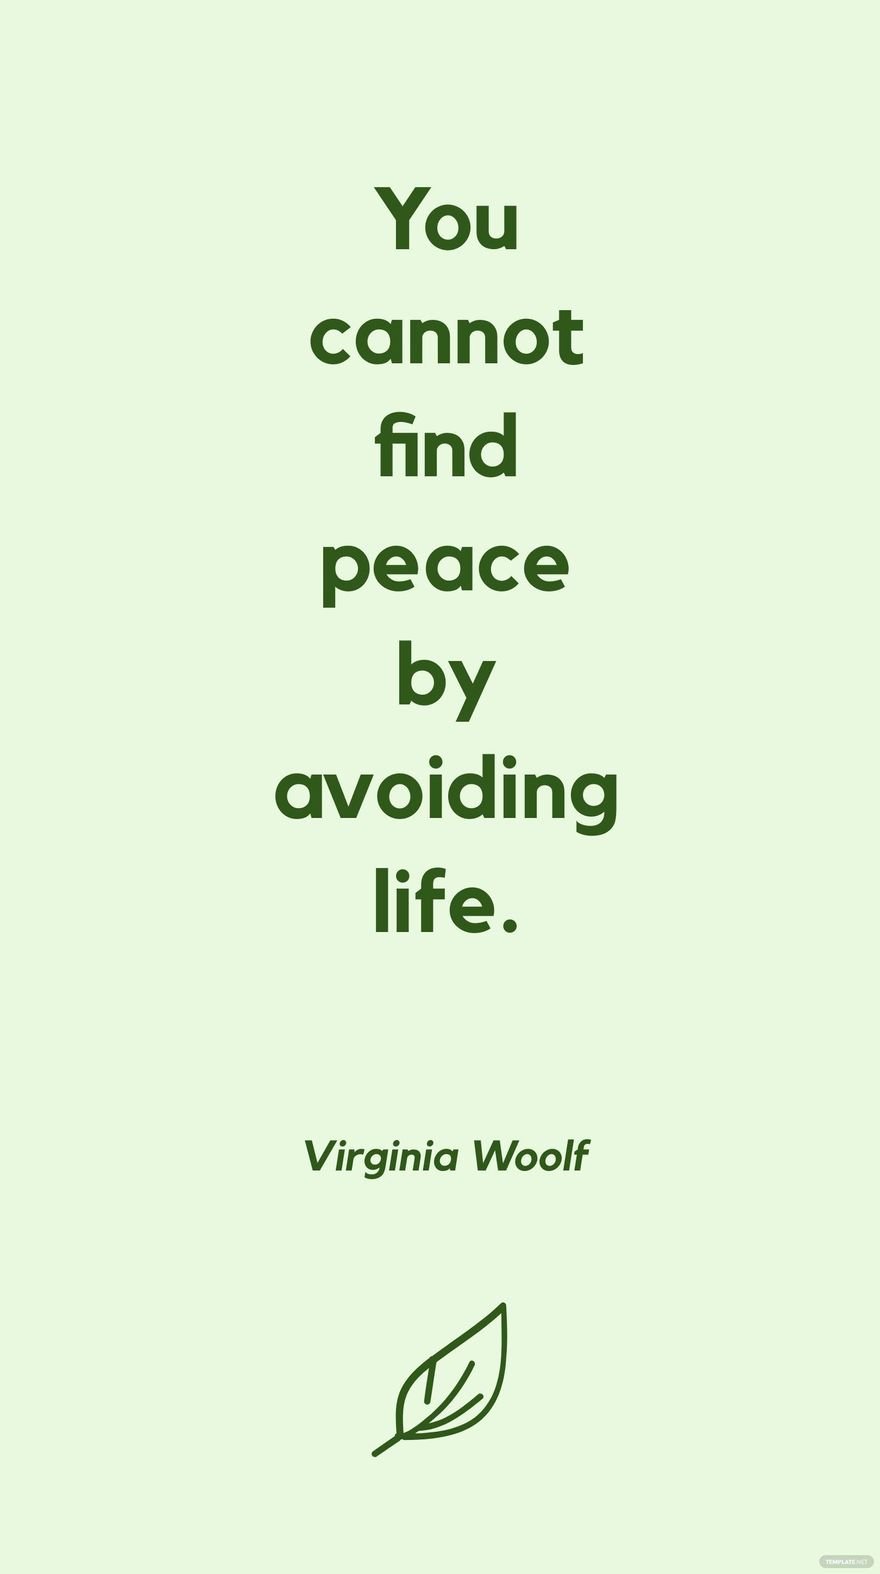 Free Virginia Woolf - You cannot find peace by avoiding life. in JPG